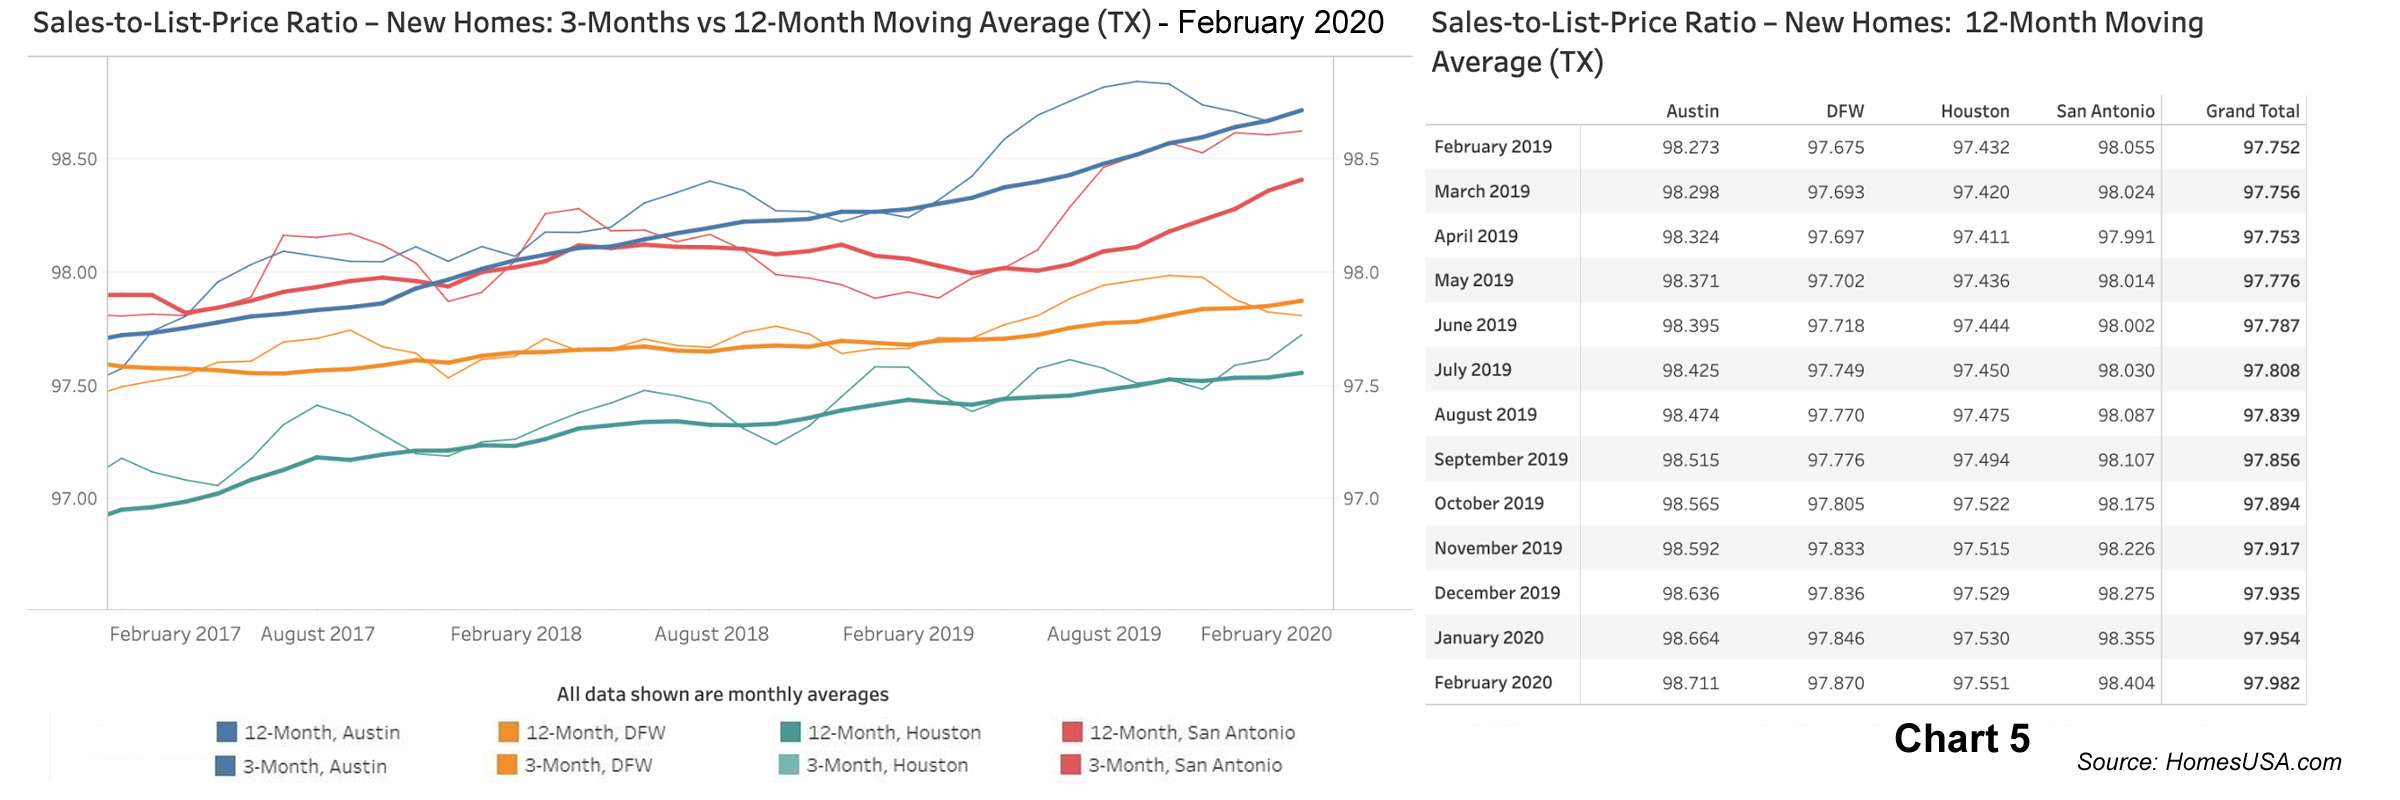 Chart 5: Sales-to-List-Price Ratio Data for Texas New Homes - Feb 2020